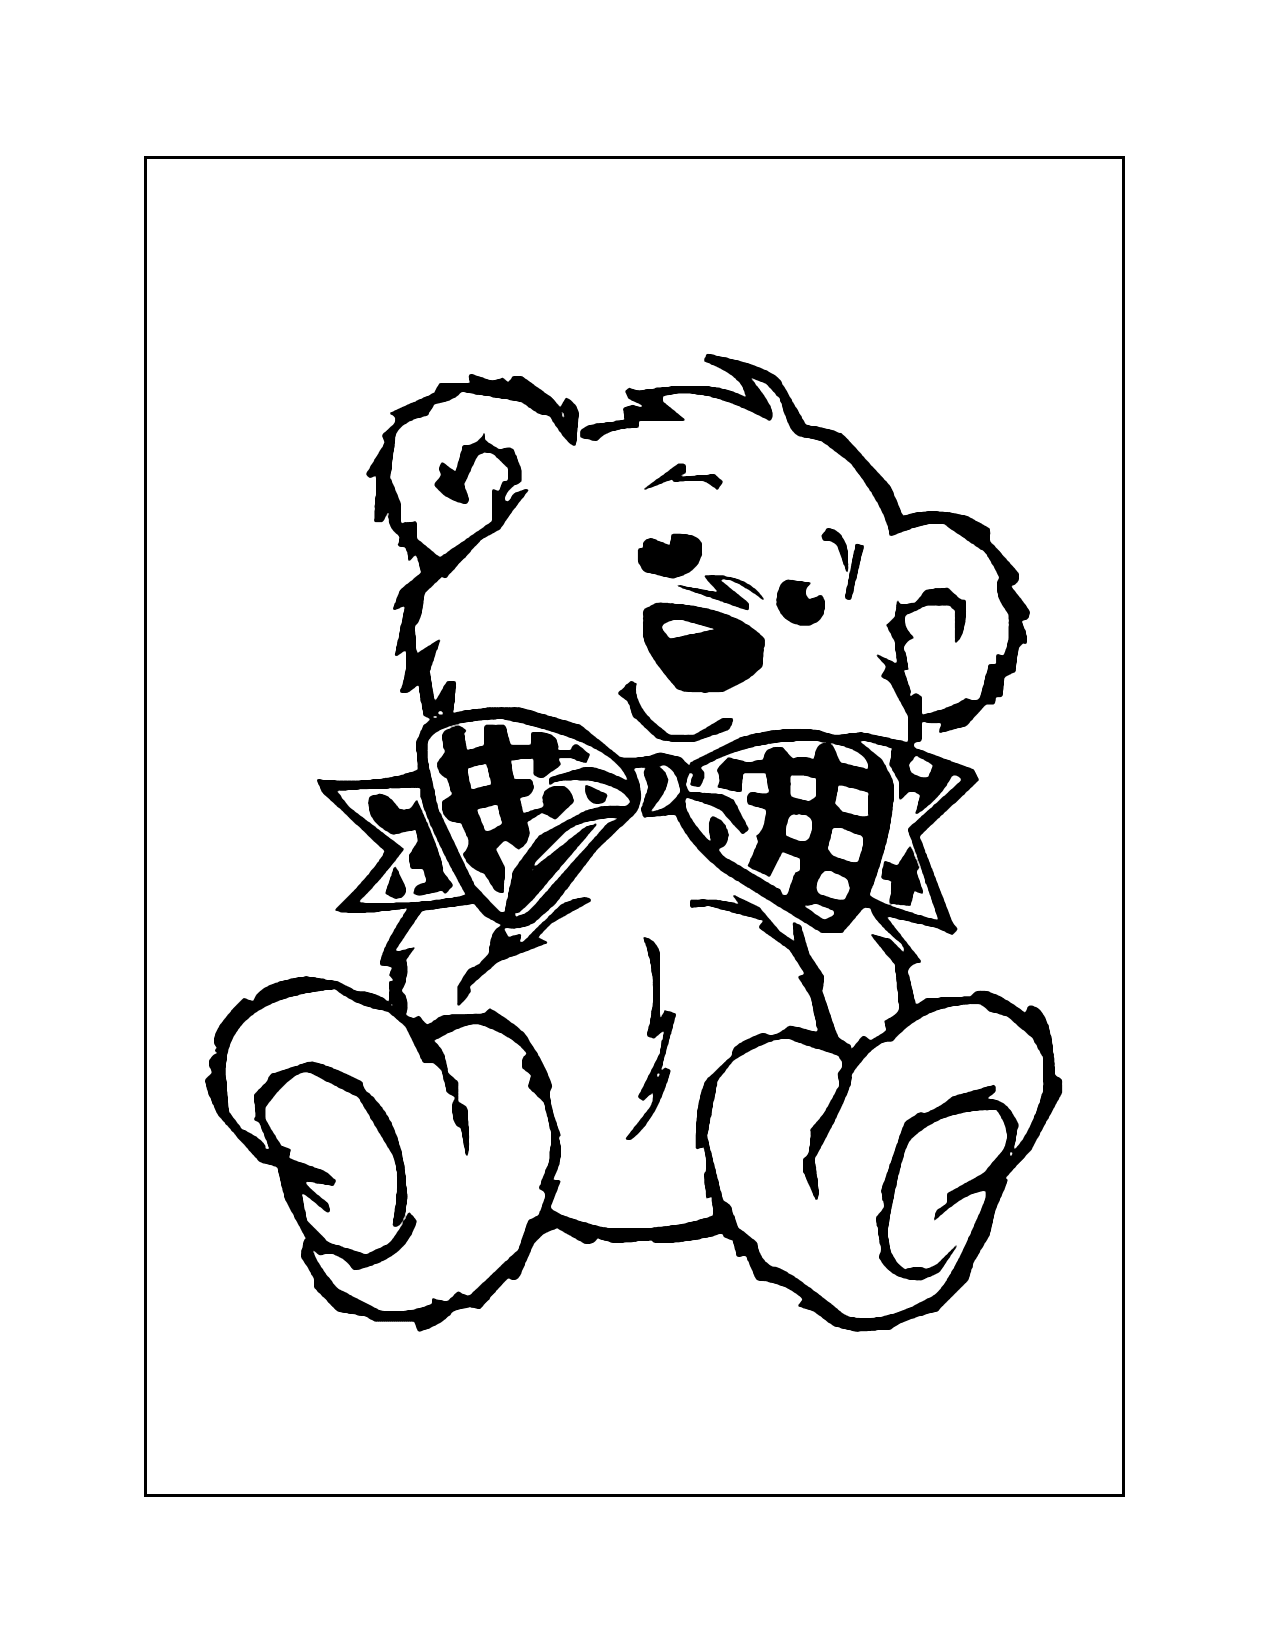 Shaggy Teddy Bear With Bow Tie Coloring Page